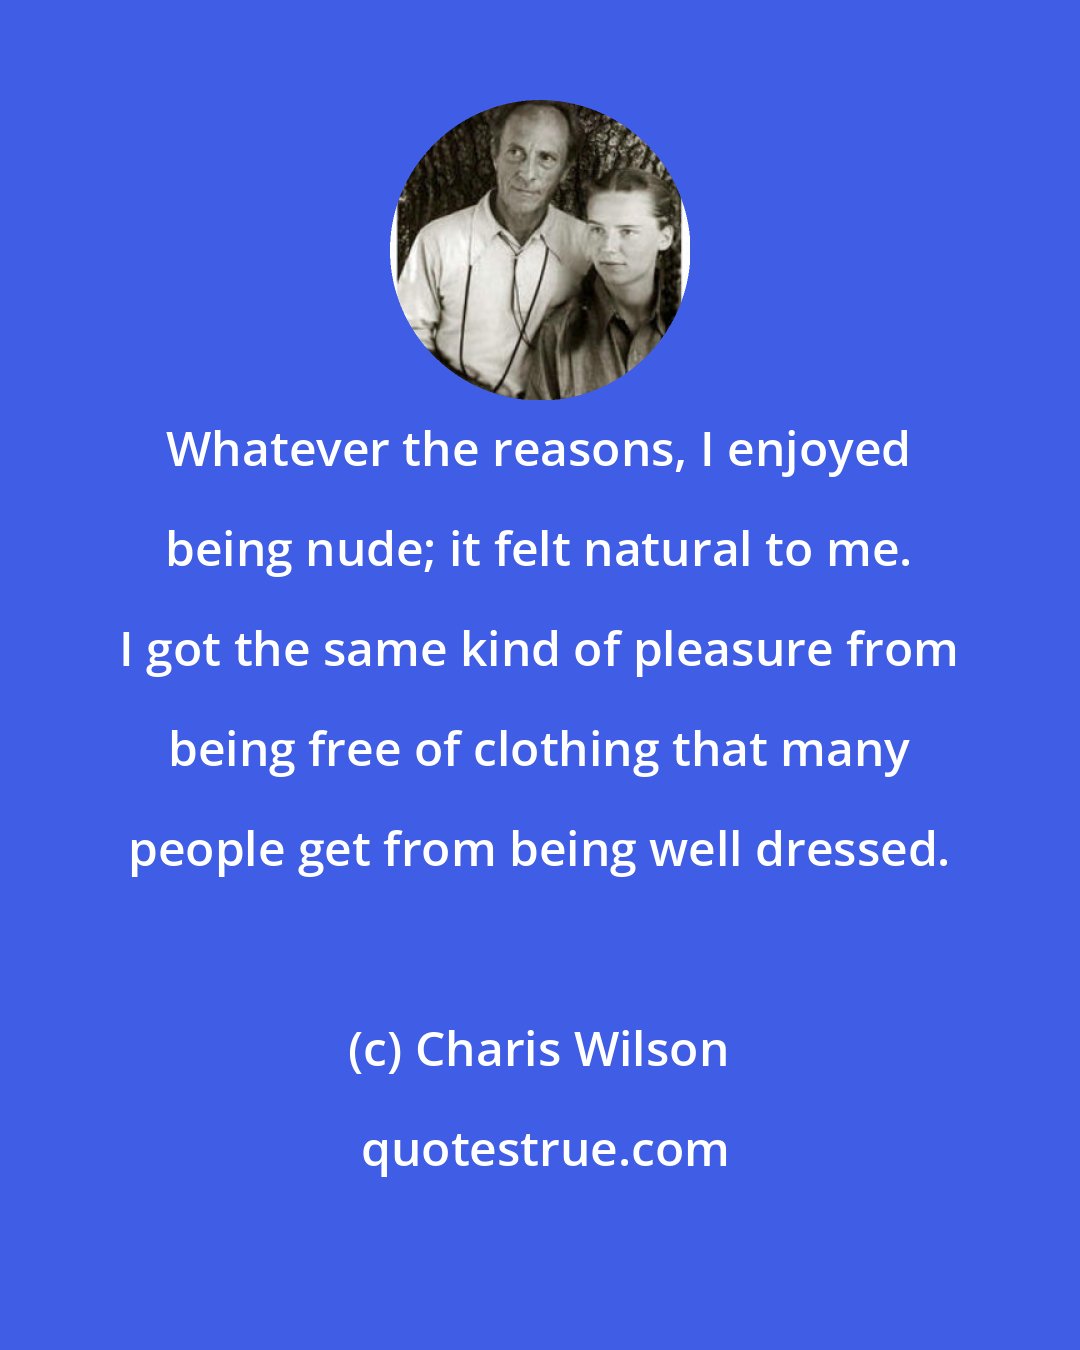 Charis Wilson: Whatever the reasons, I enjoyed being nude; it felt natural to me. I got the same kind of pleasure from being free of clothing that many people get from being well dressed.